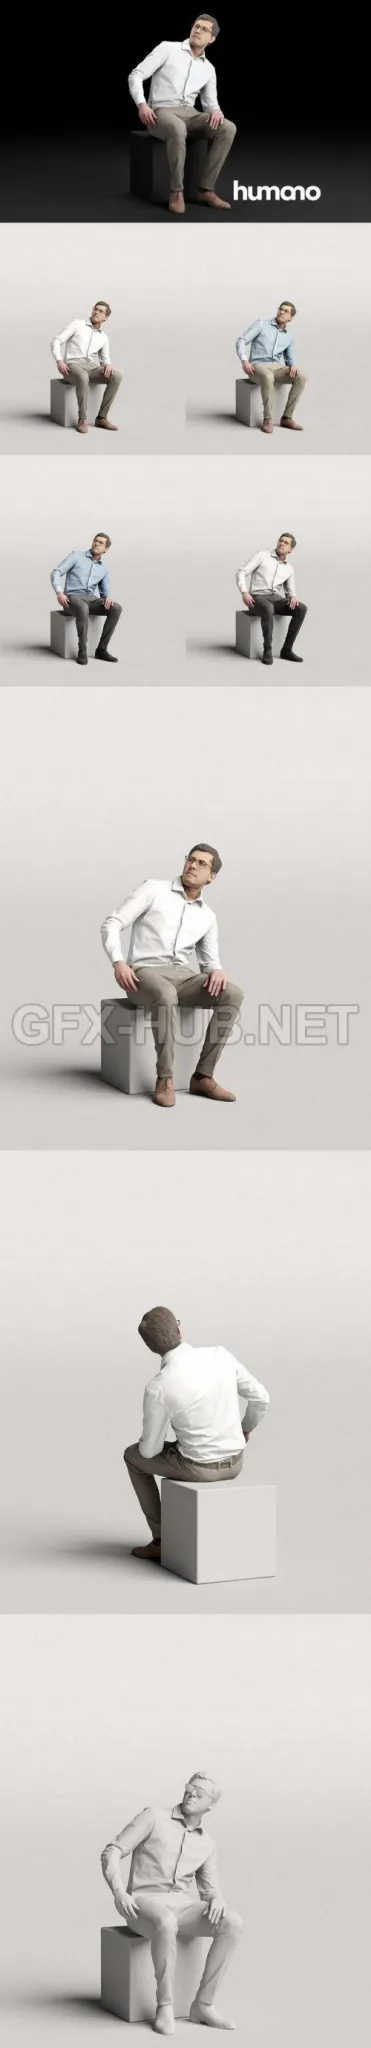 PBR Game 3D Model – Humano Elegant business man in shirt sitting and looking 0115